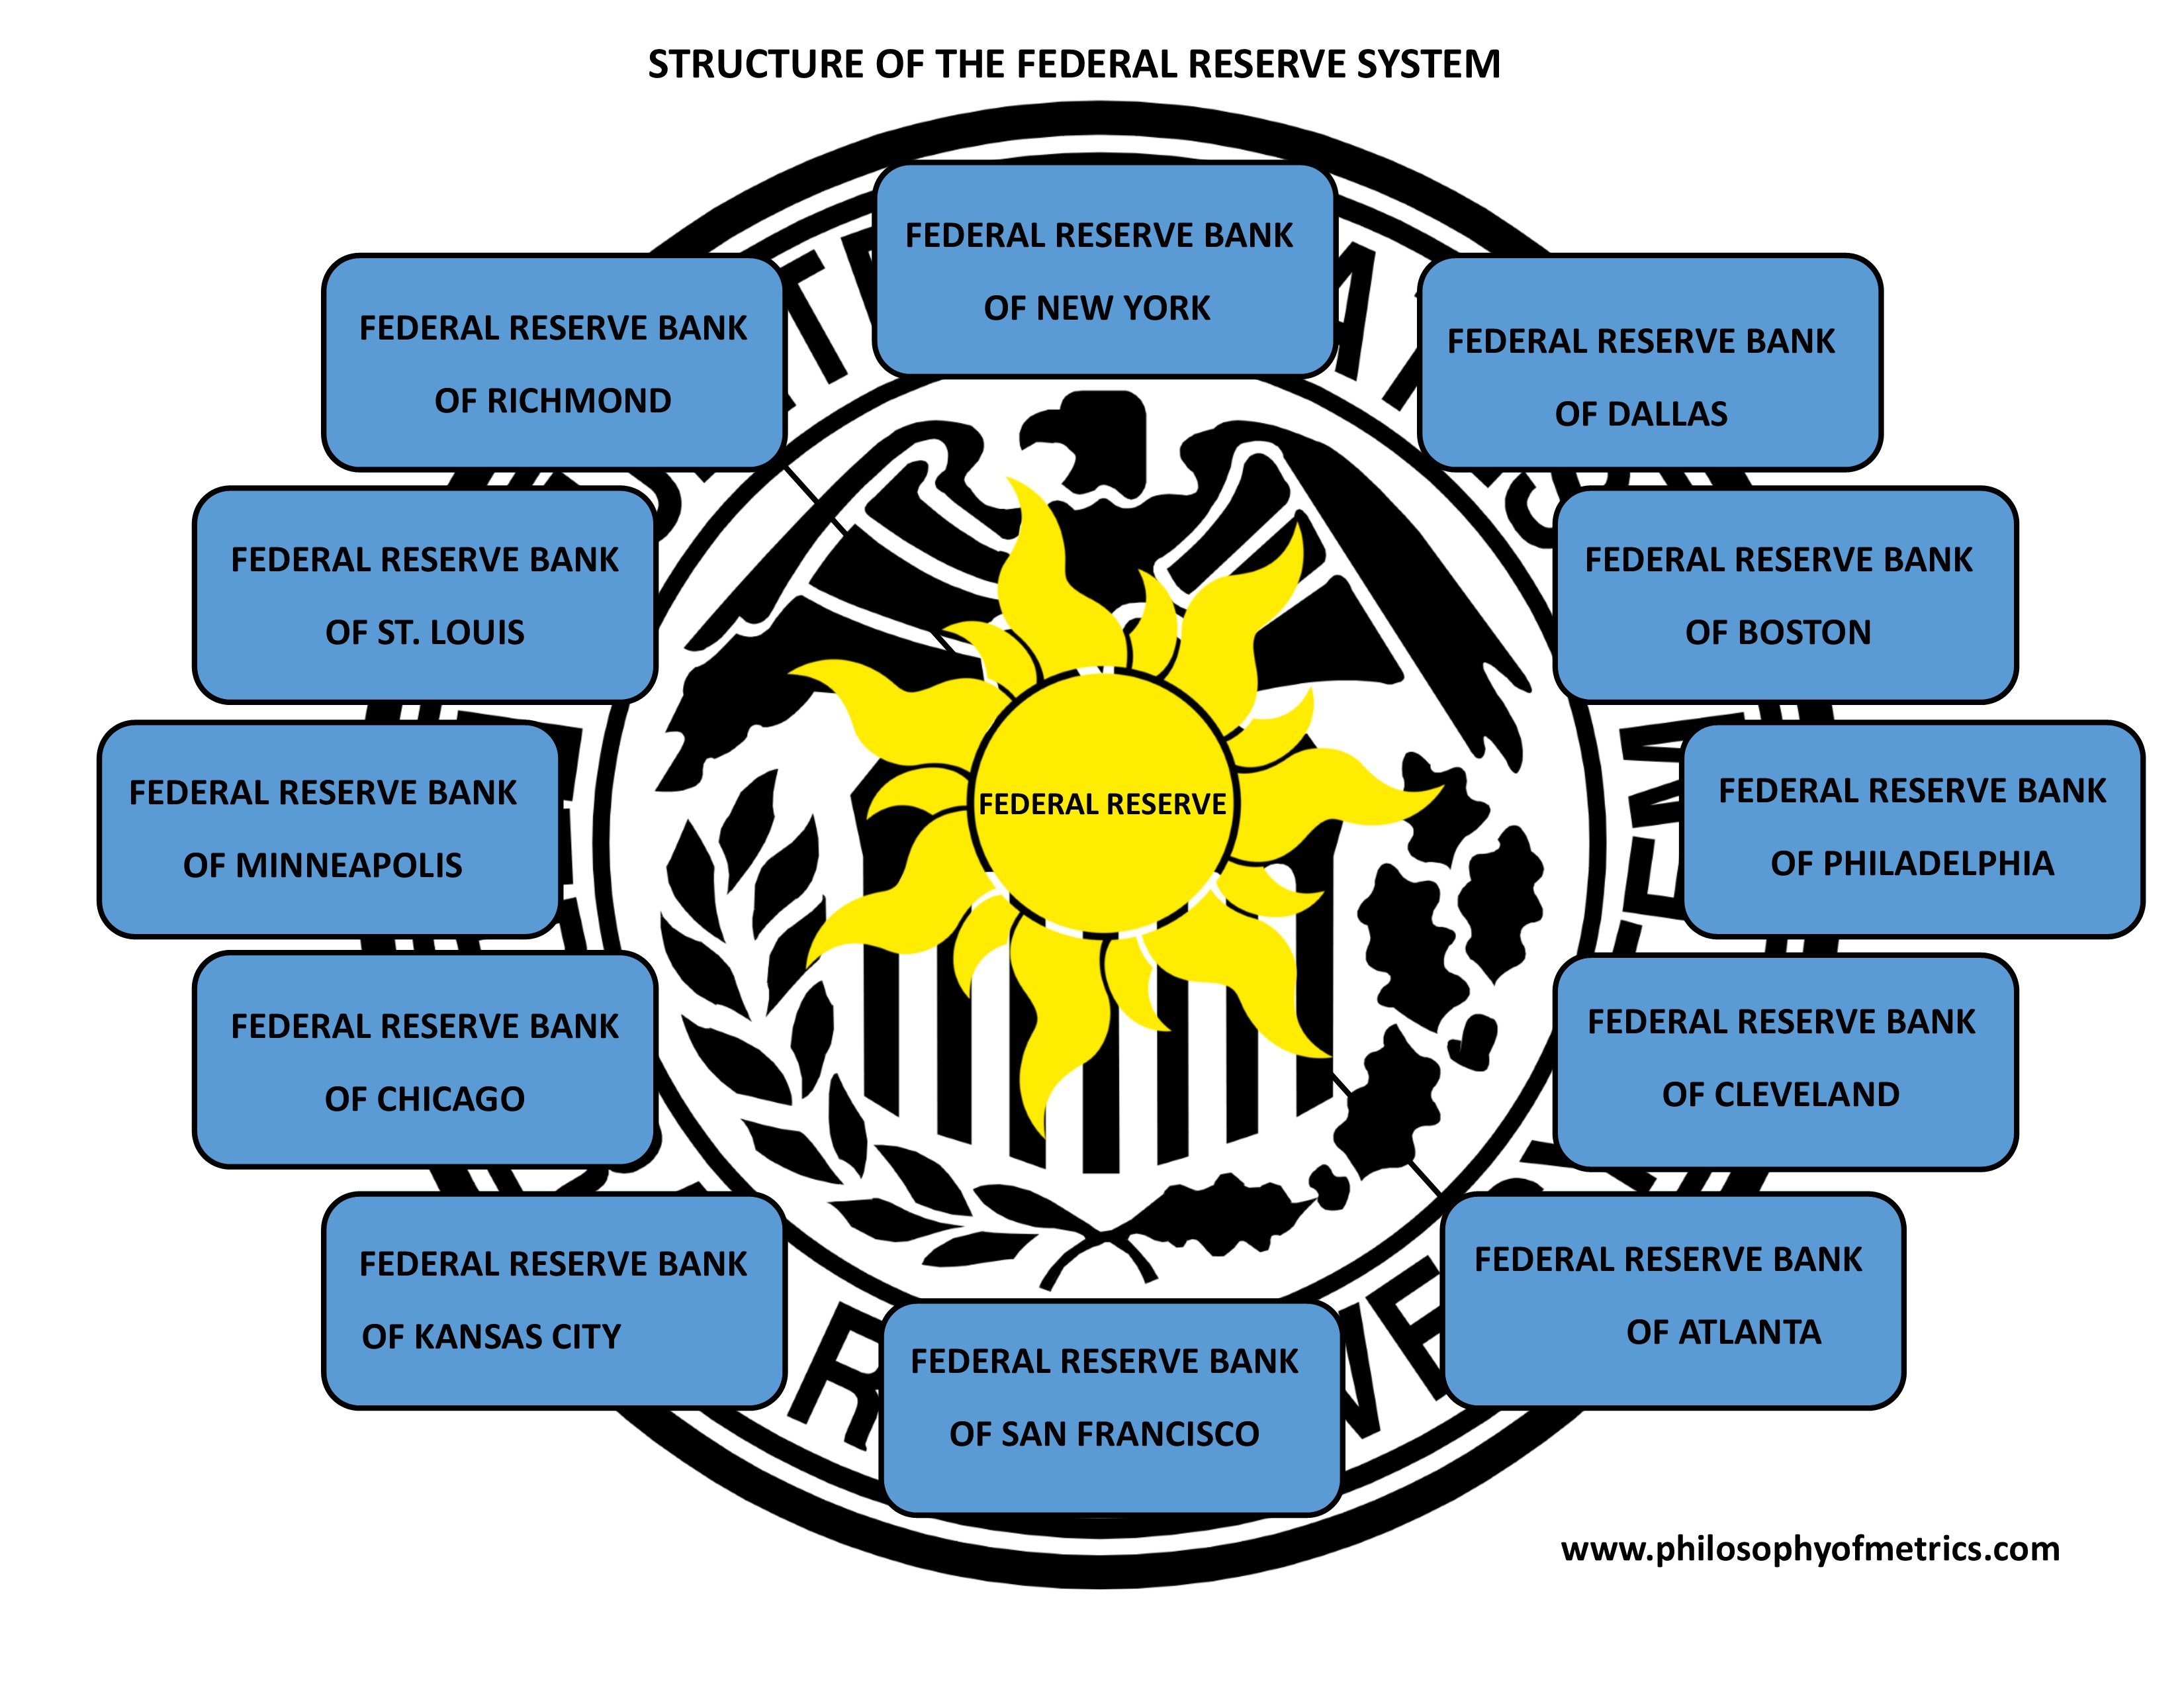 Structure of the Federal Reserve System